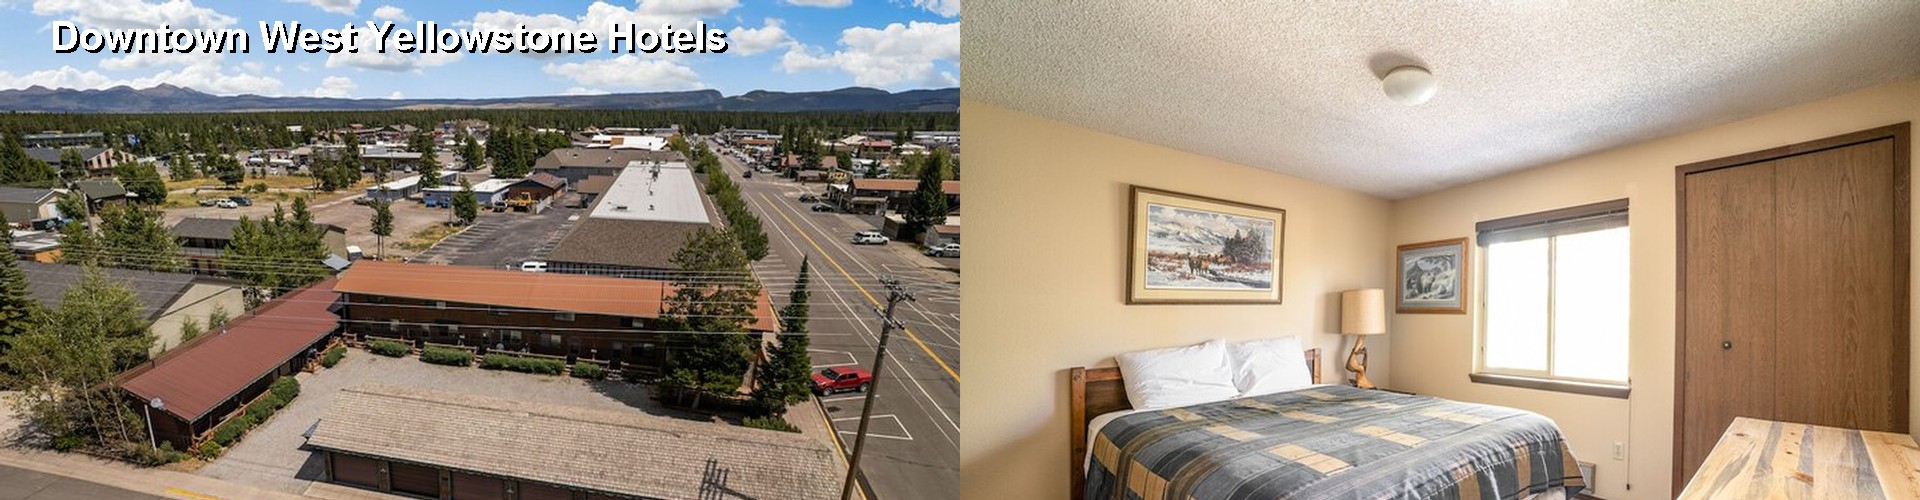 5 Best Hotels near Downtown West Yellowstone